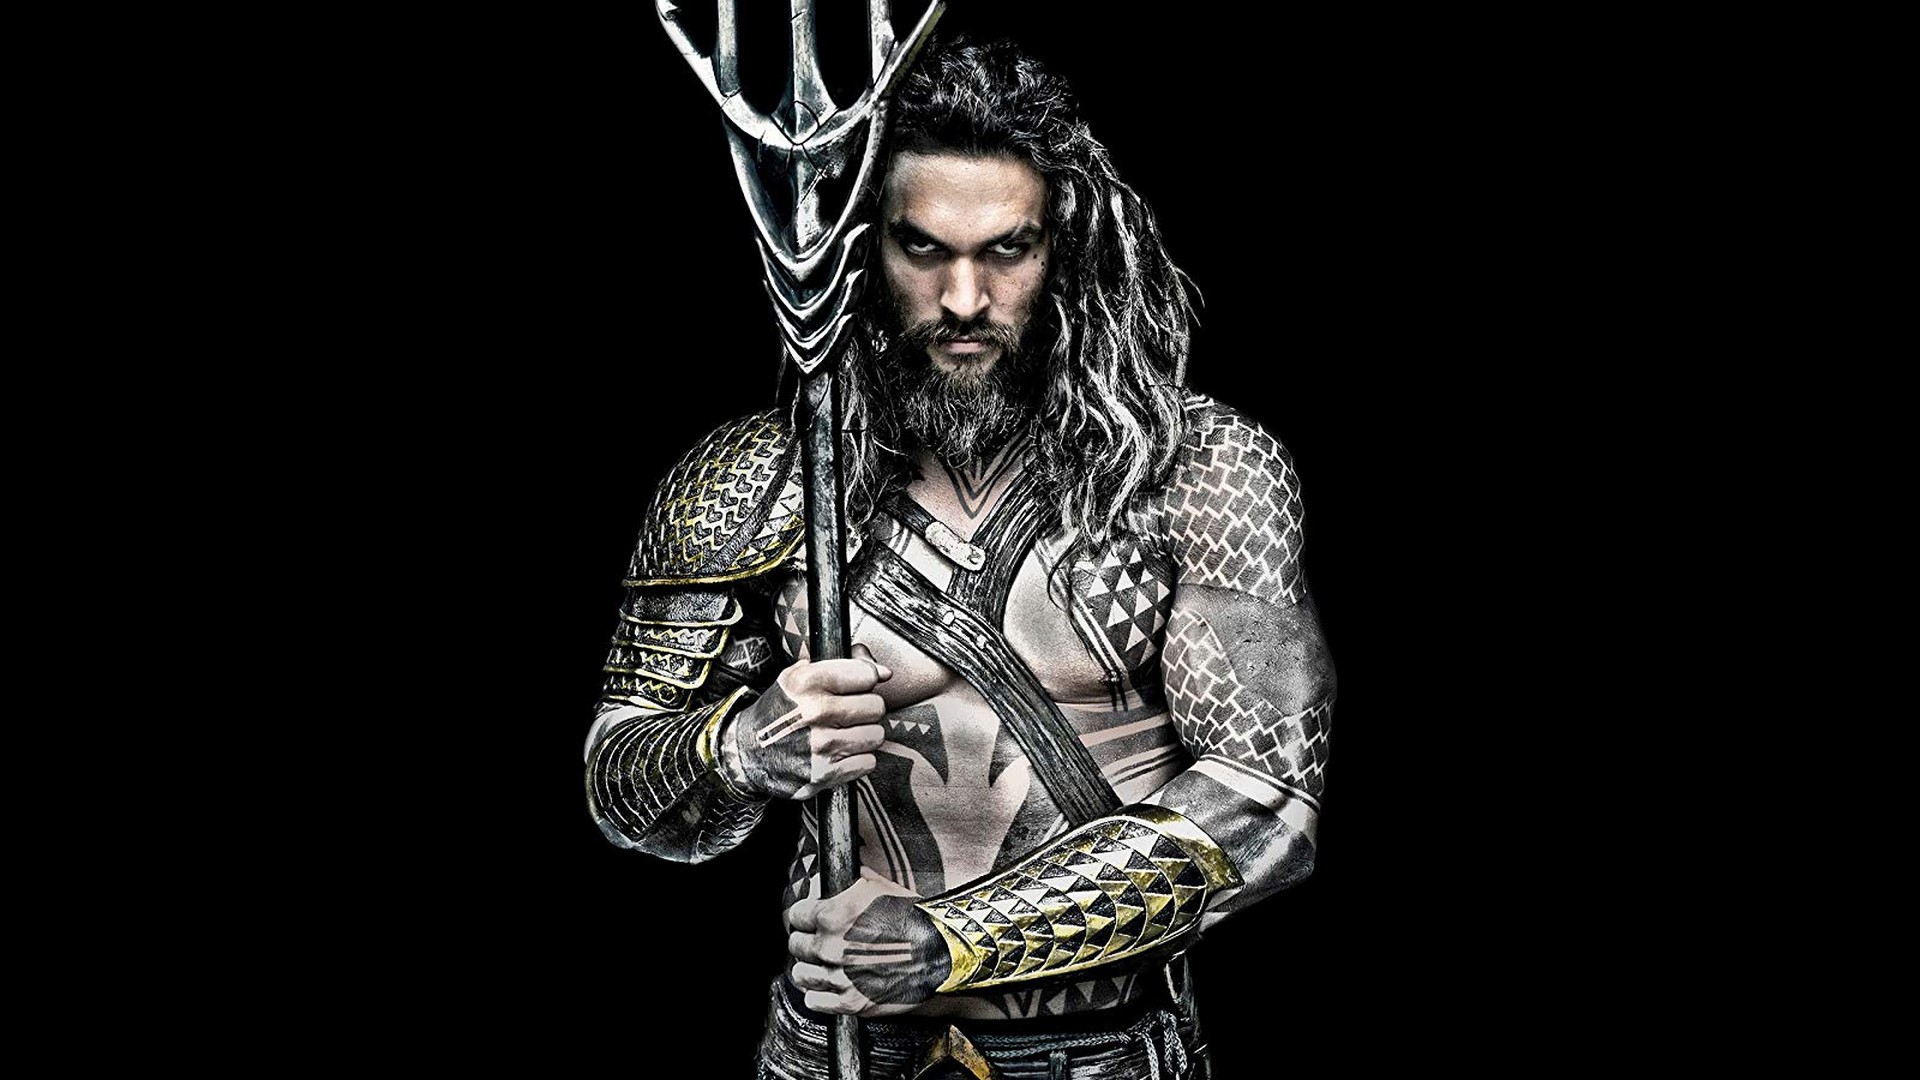 Aquaman Wallpaper HD With Resolution 1920X1080 pixel. You can make this wallpaper for your Mac or Windows Desktop Background, iPhone, Android or Tablet and another Smartphone device for free